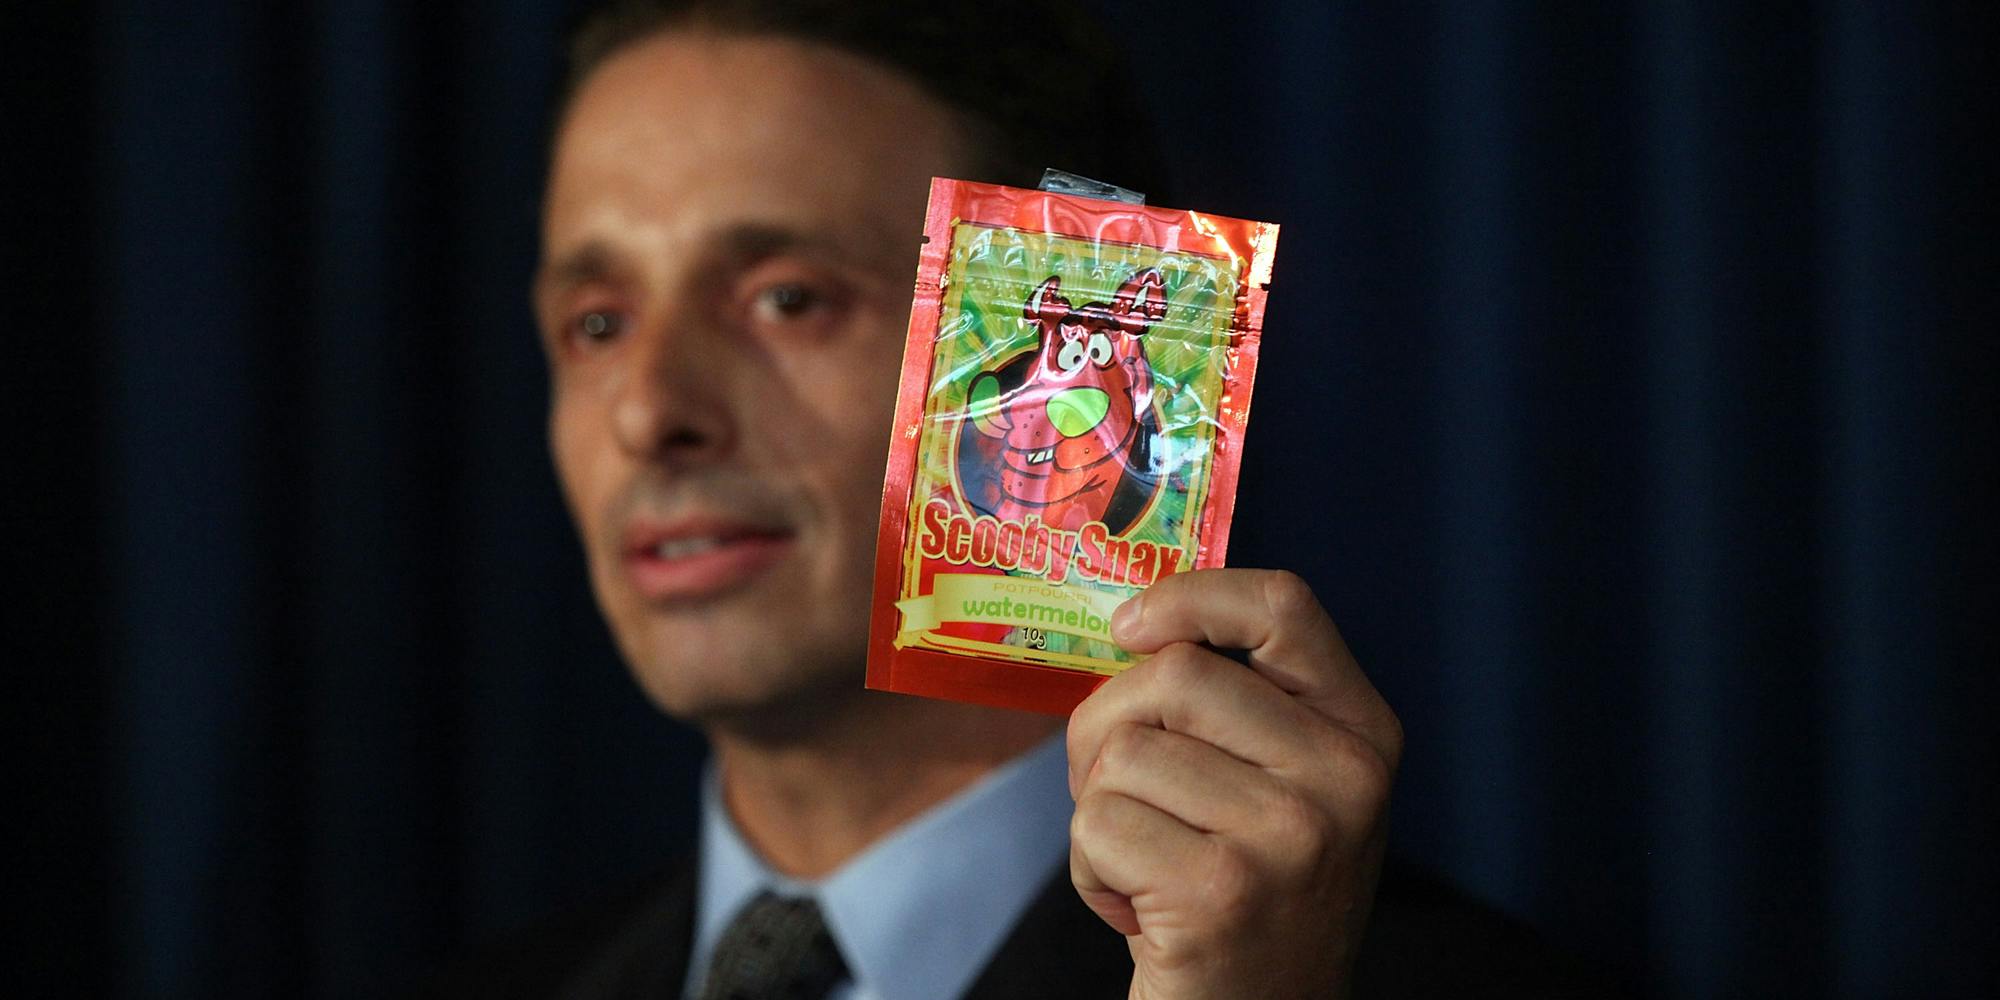 Kieth Kruskall with the Drug Enforcement Administration, holds up a package of synthetic marijuana